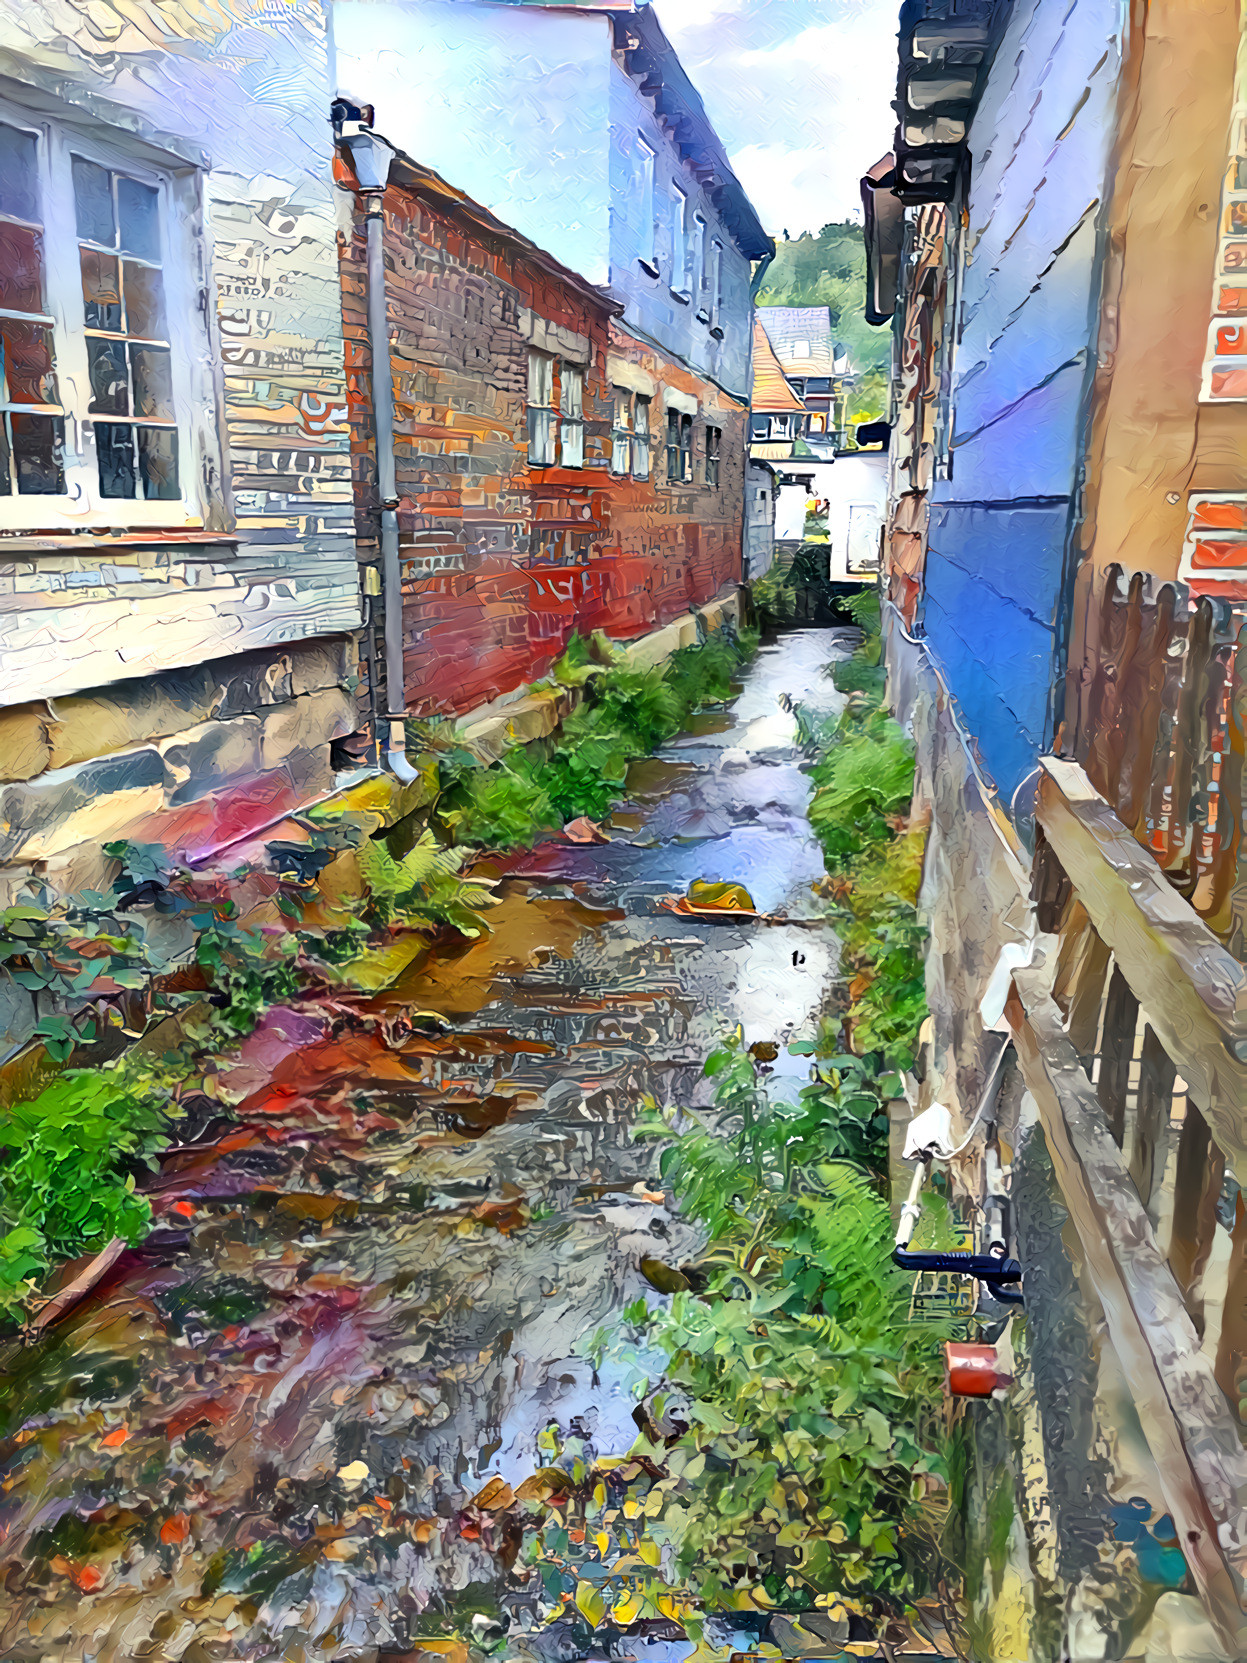 Alley with a small creek